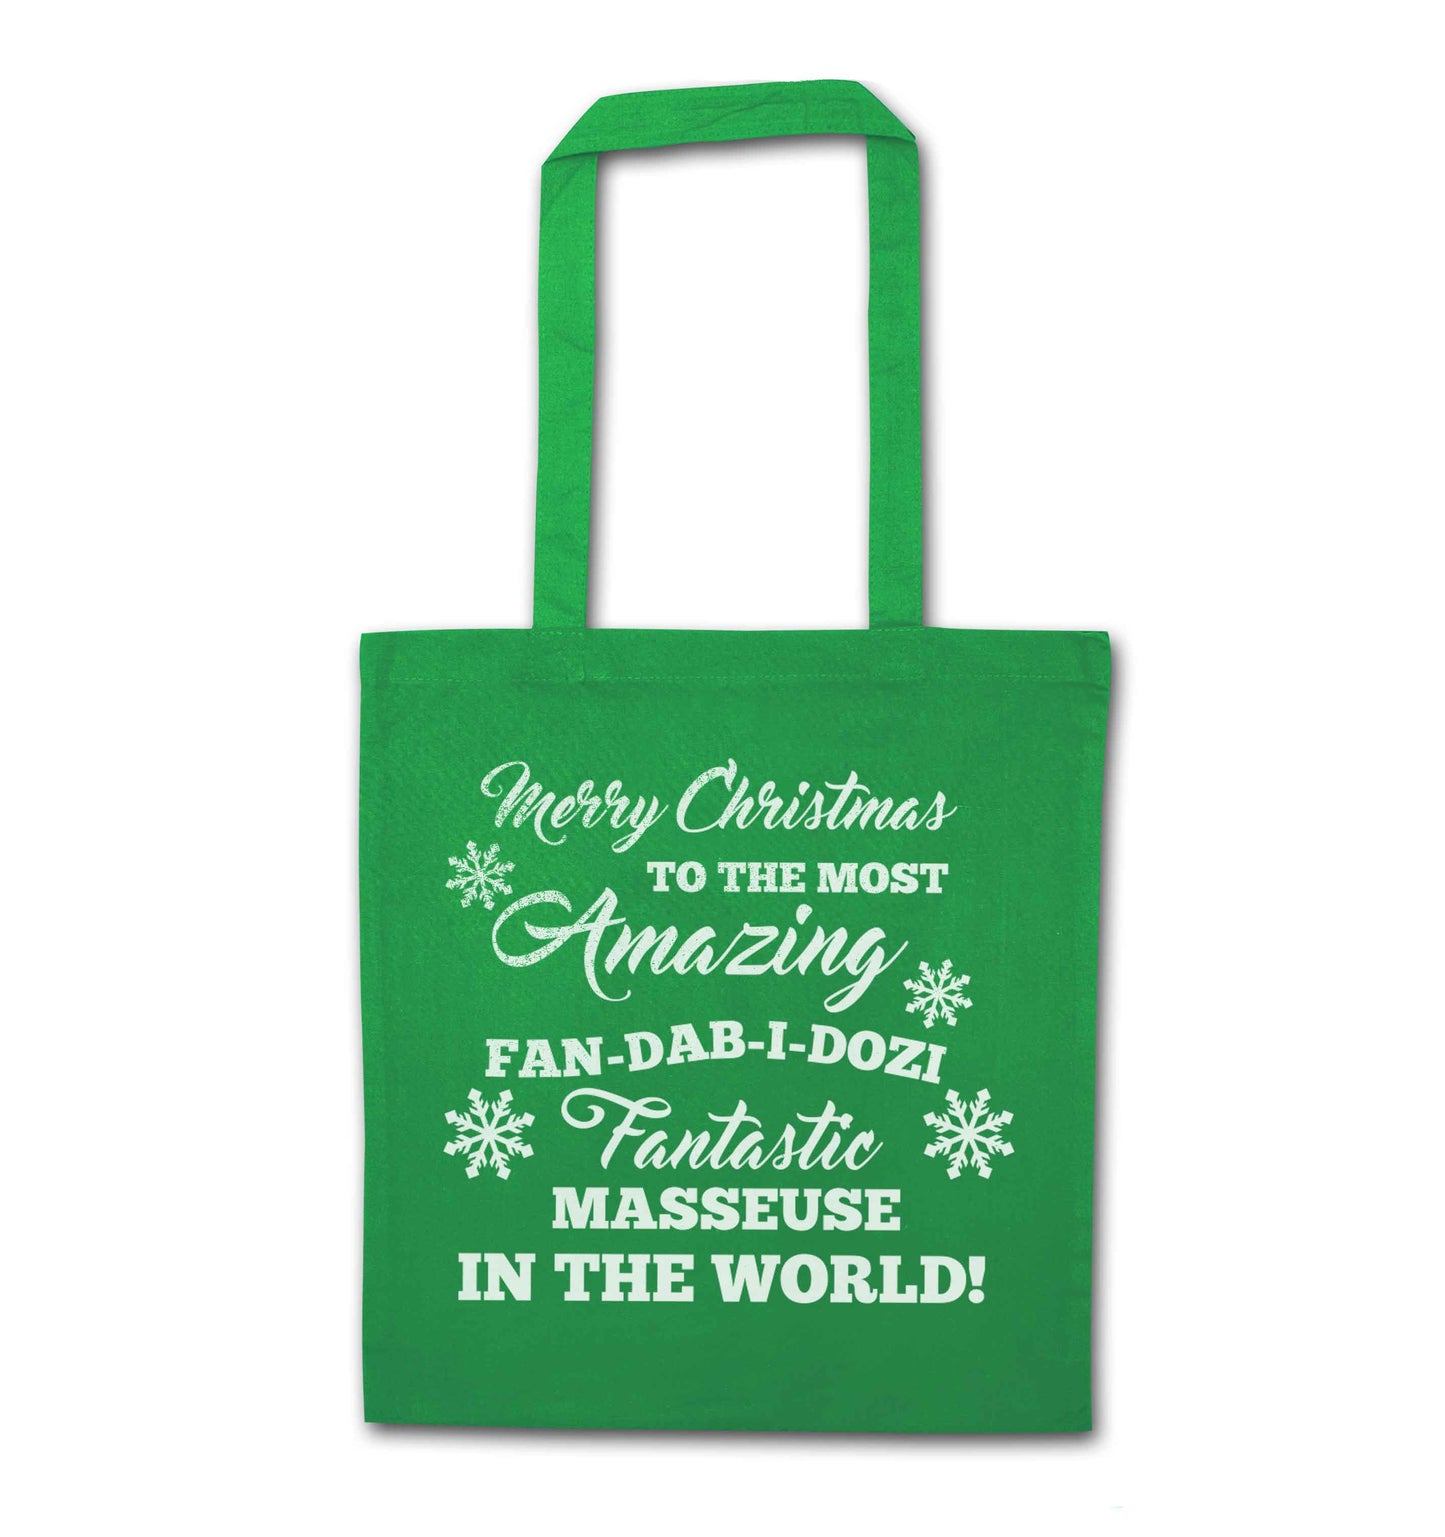 Merry Christmas to the most amazing fan-dab-i-dozi fantasic masseuse in the world green tote bag